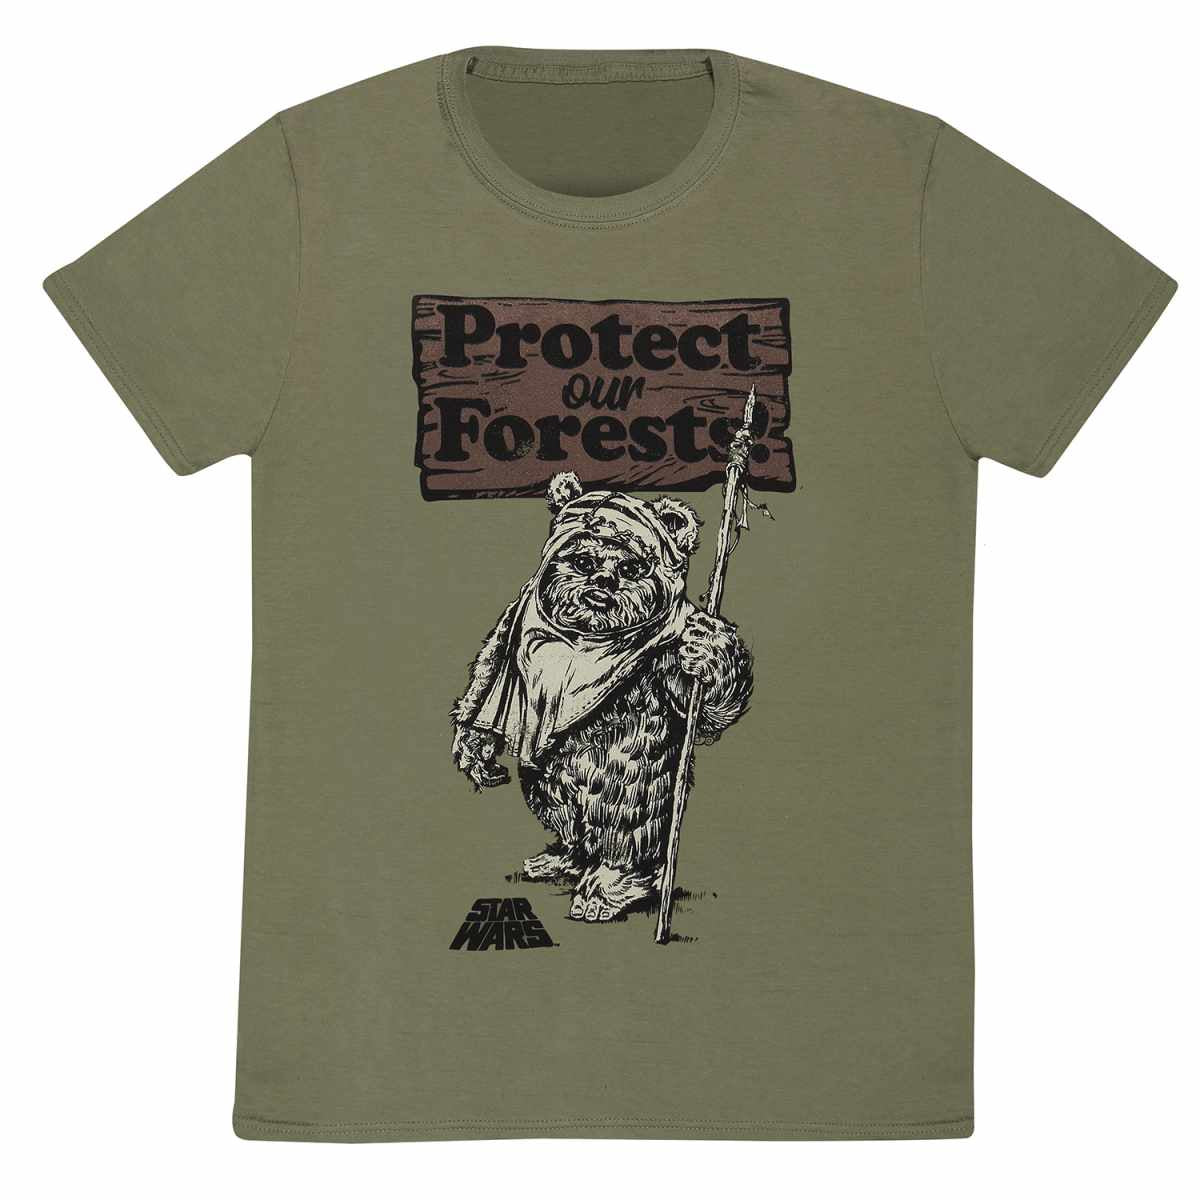 STAR WARS - Protect Our Forests Olive T-Shirt